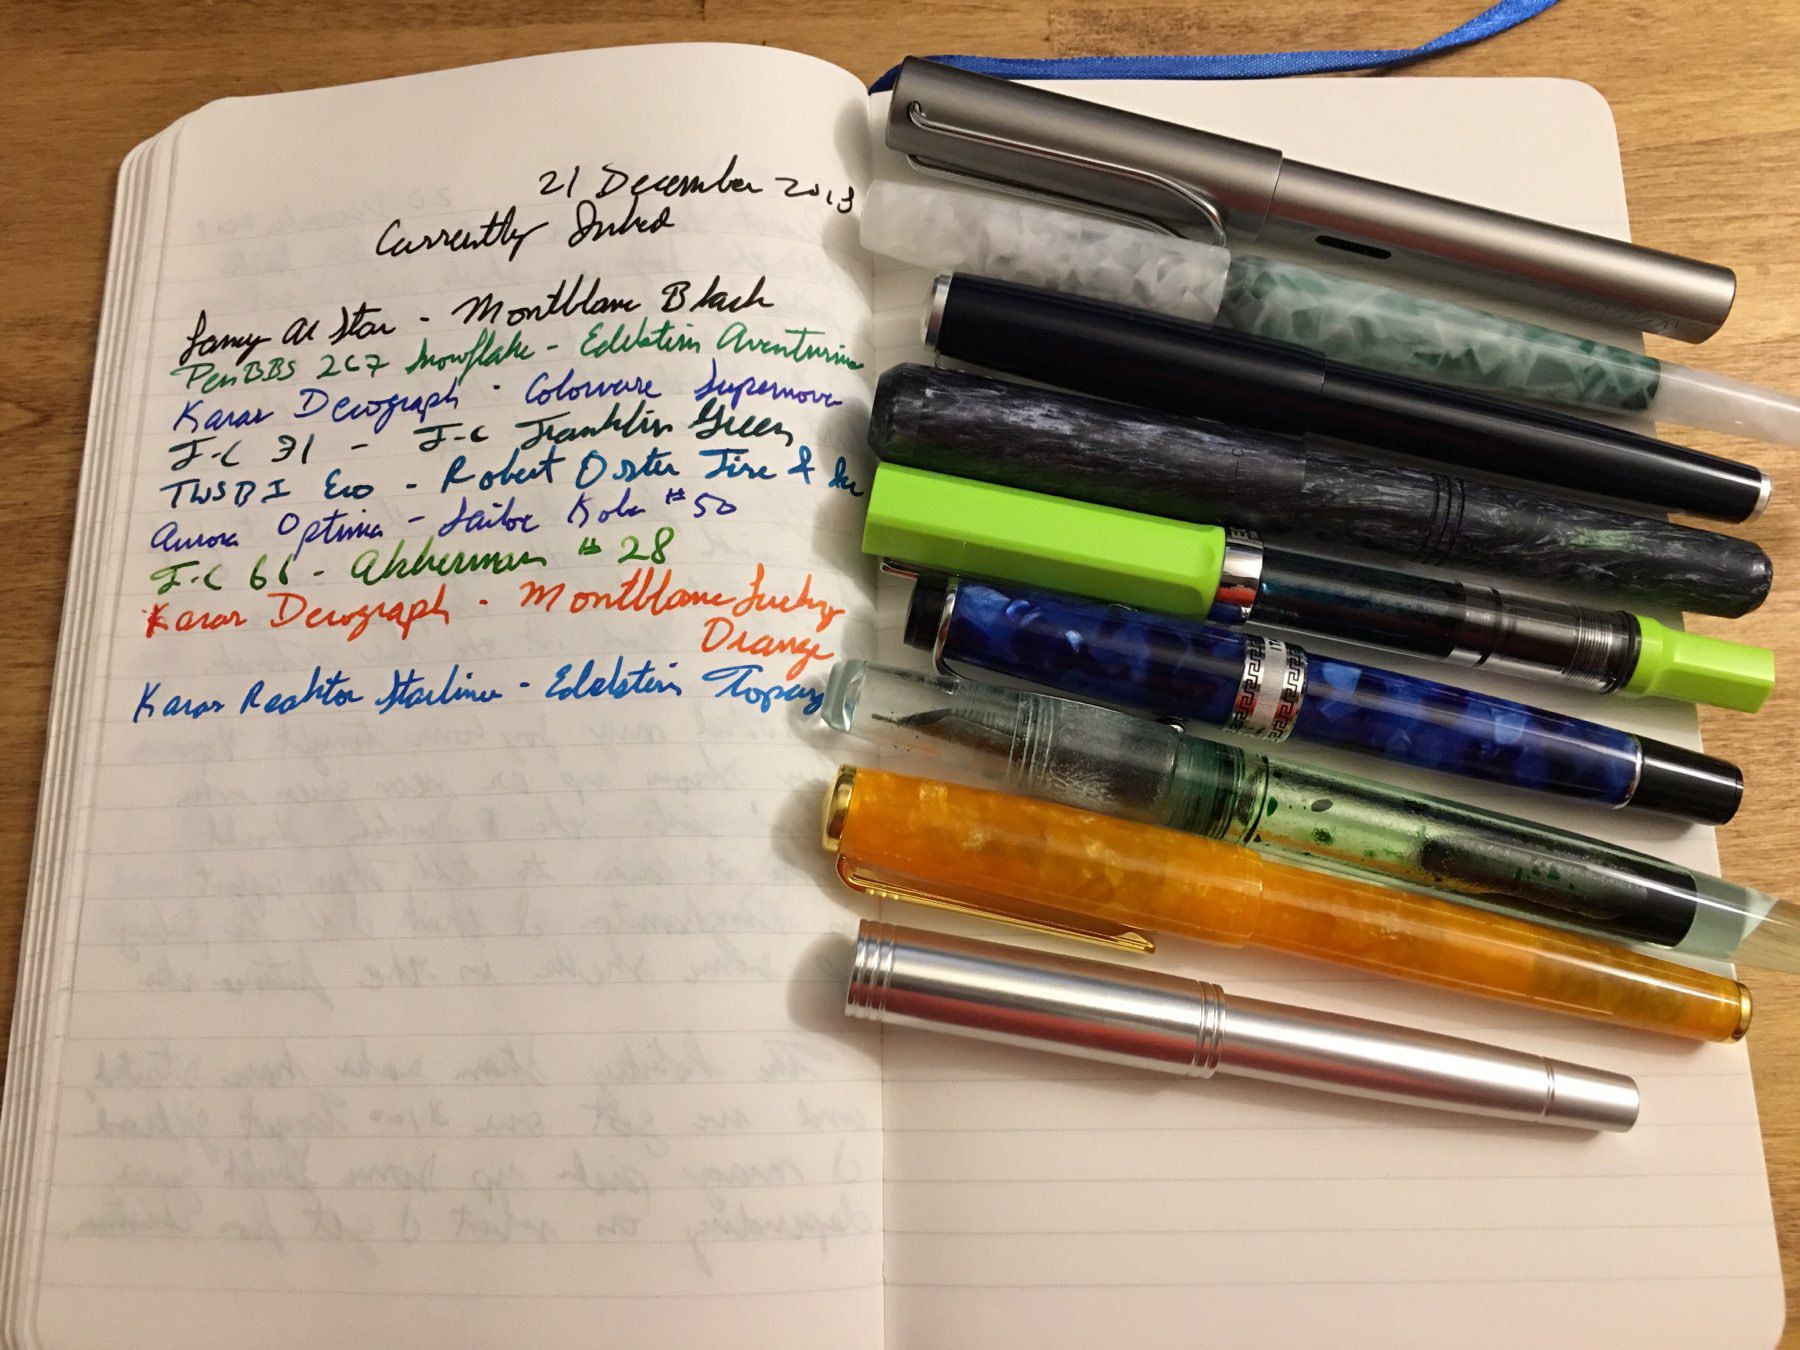 an open notebook with a list of pens and inks on the left side, and the corresponding fountainpen on the right side